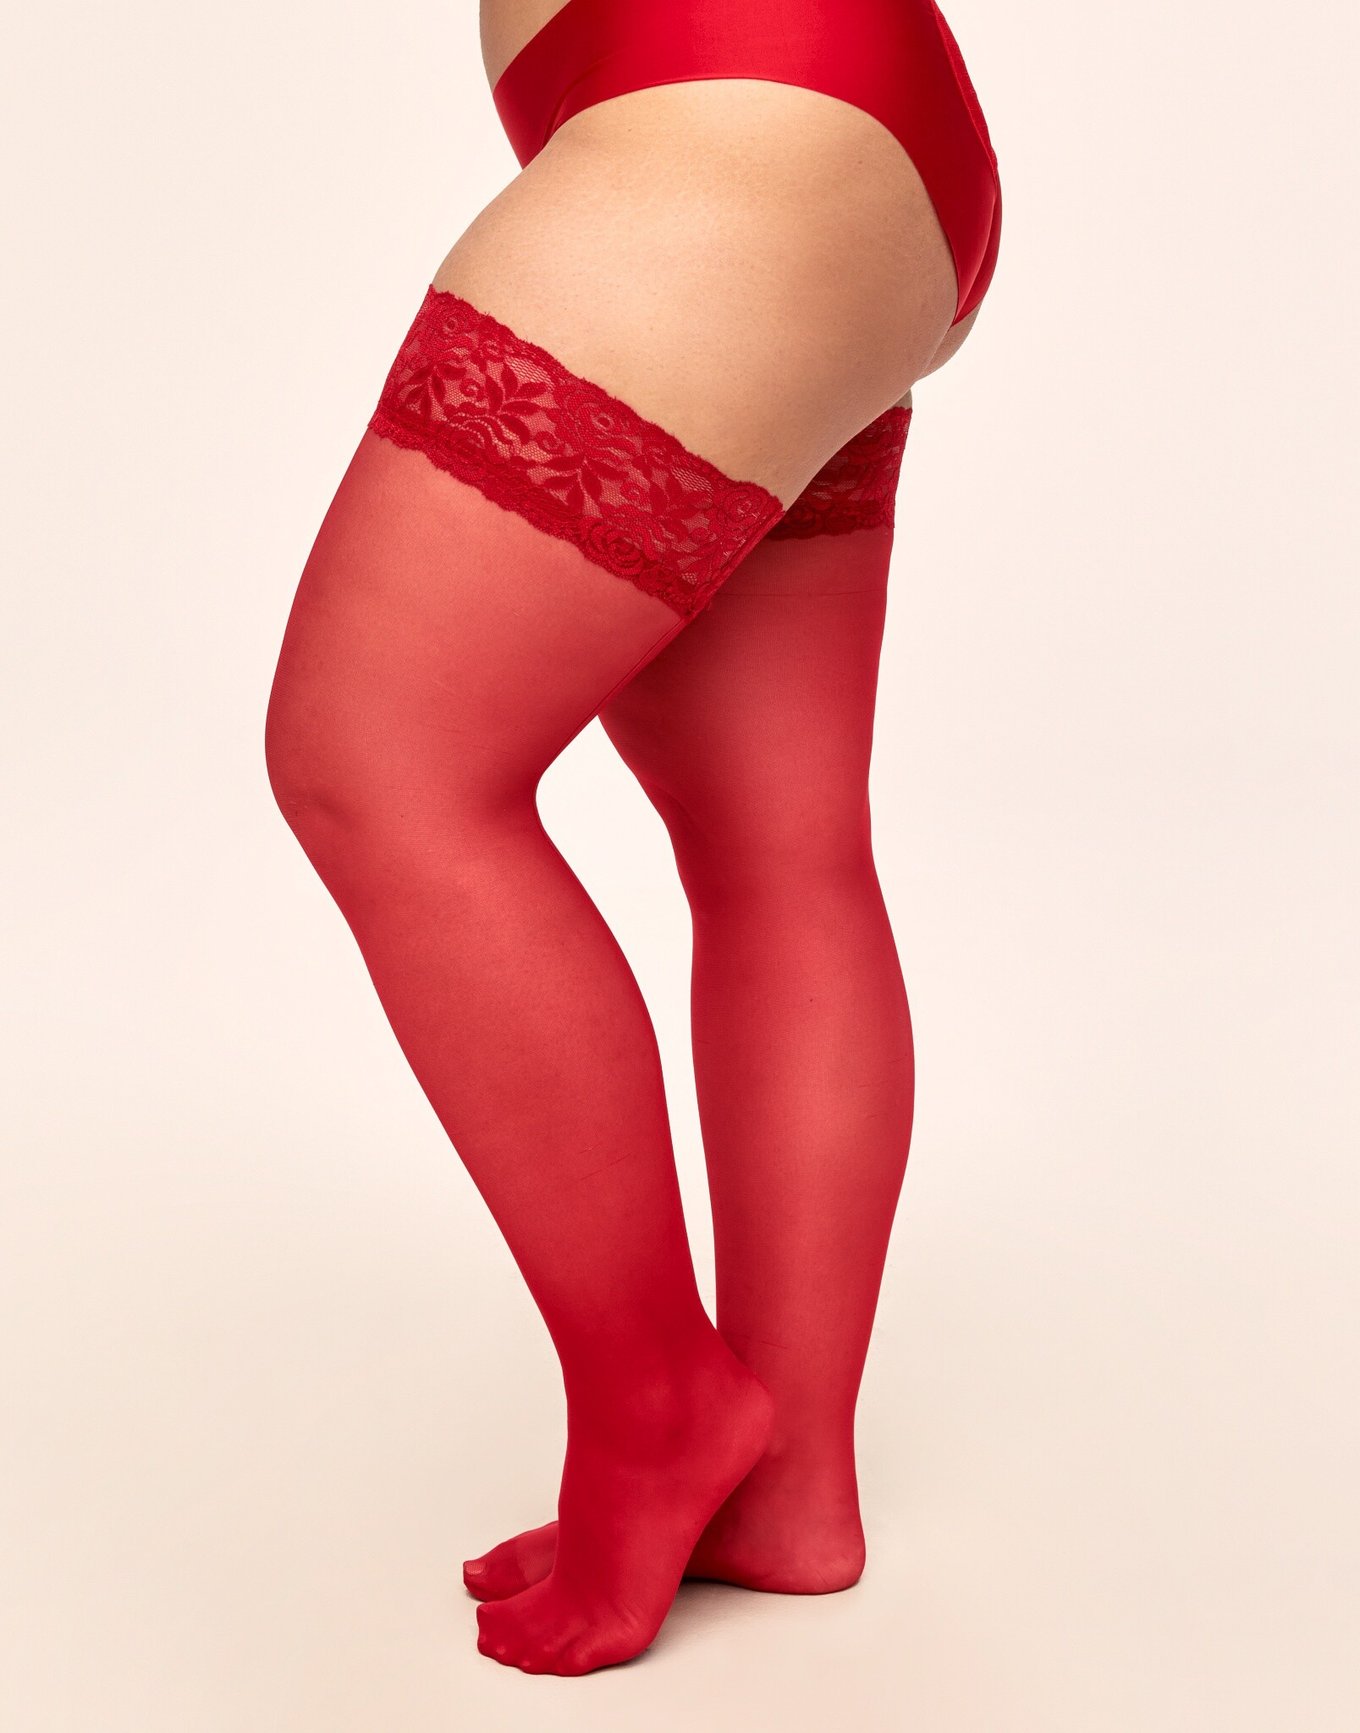 Plus Size Black Thigh High Stockings with Back Seam for Adults